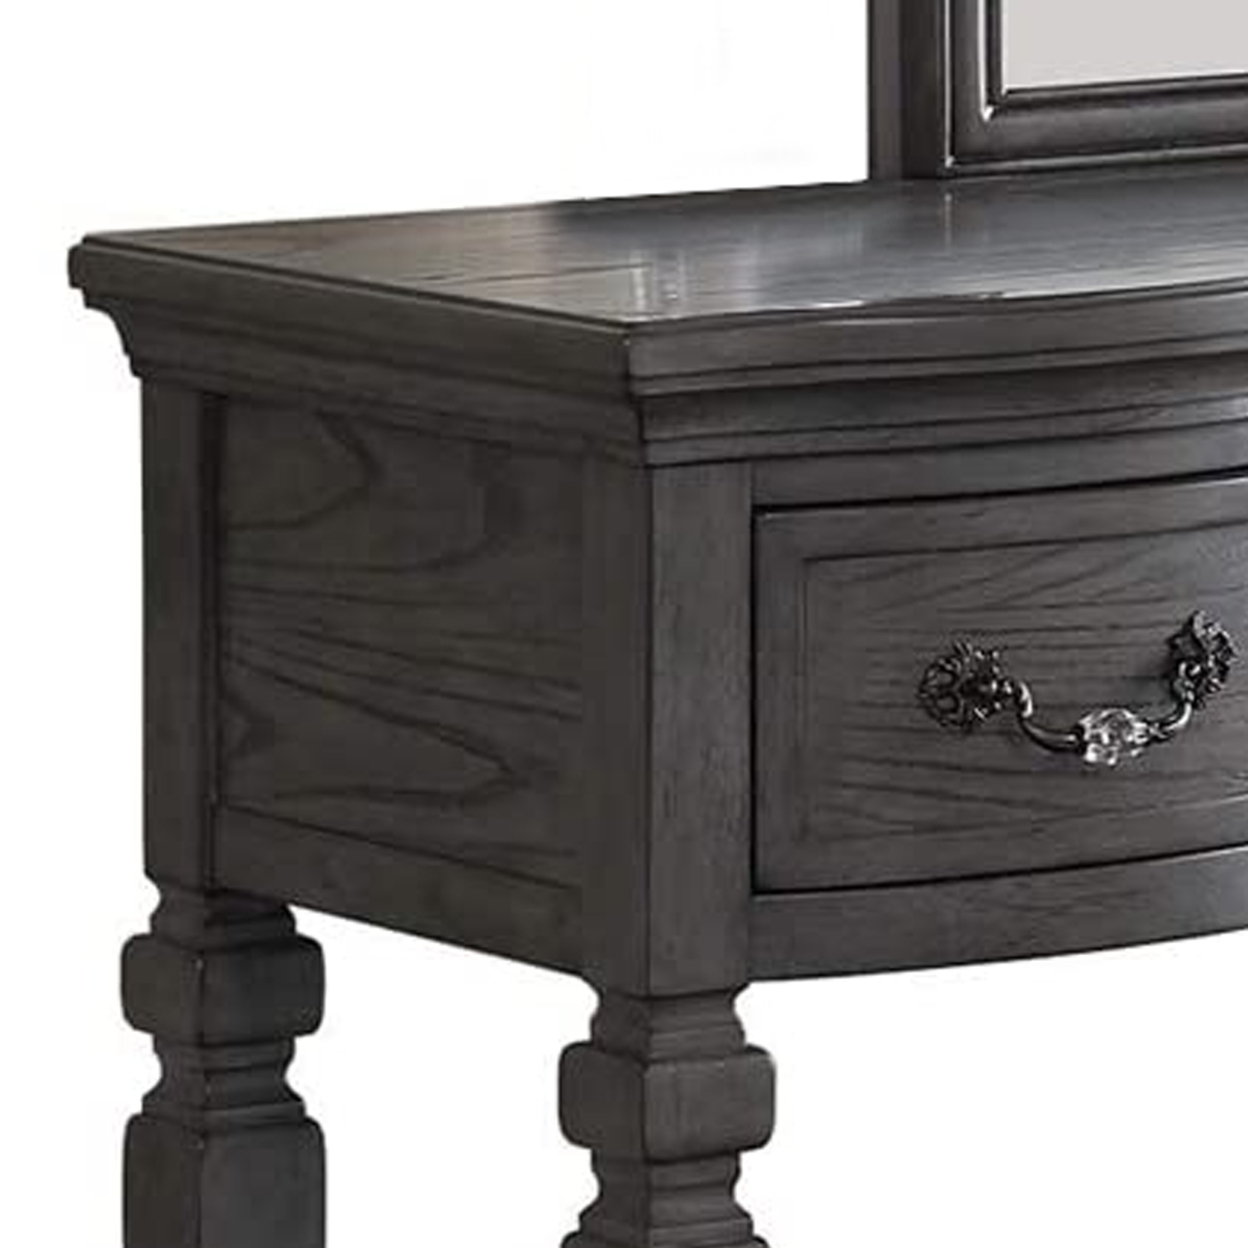 3 Piece Vanity Set With Carved Mirror And Turned Legs, Gray- Saltoro Sherpi